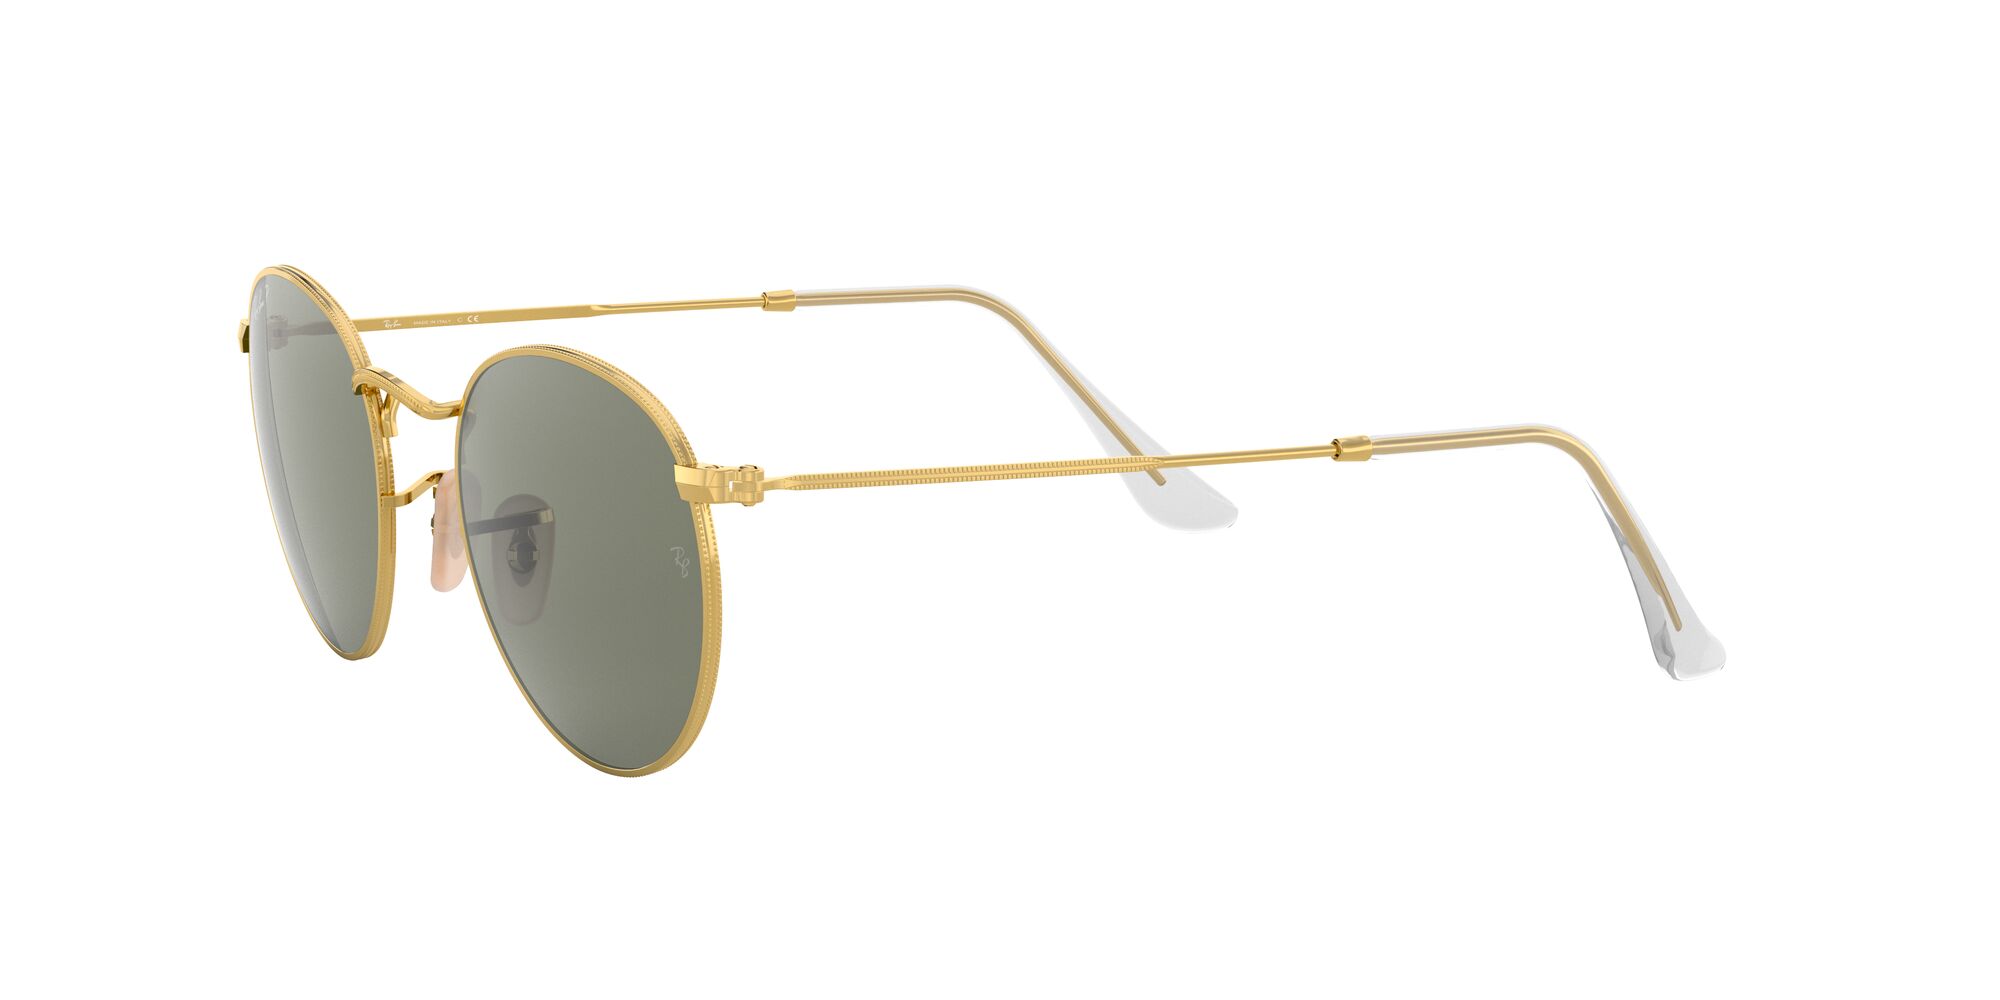 Ray-Ban RB3447 Round Metal Sunglasses - image 3 of 12